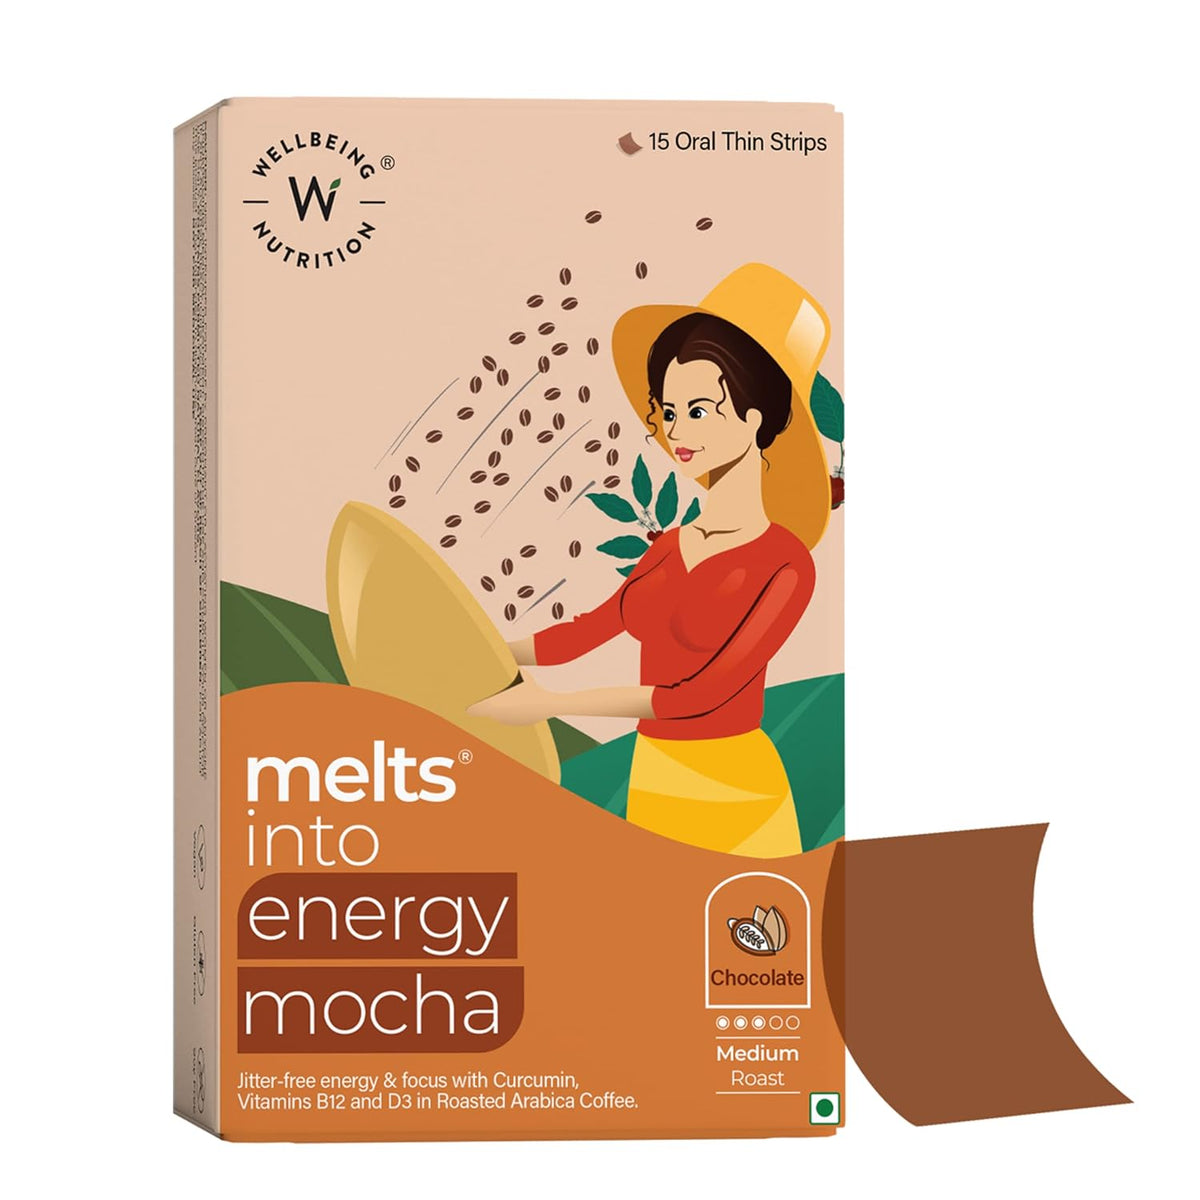 Wellbeing Nutrition Melts into Energy Mocha 15 Oral Thin Strips